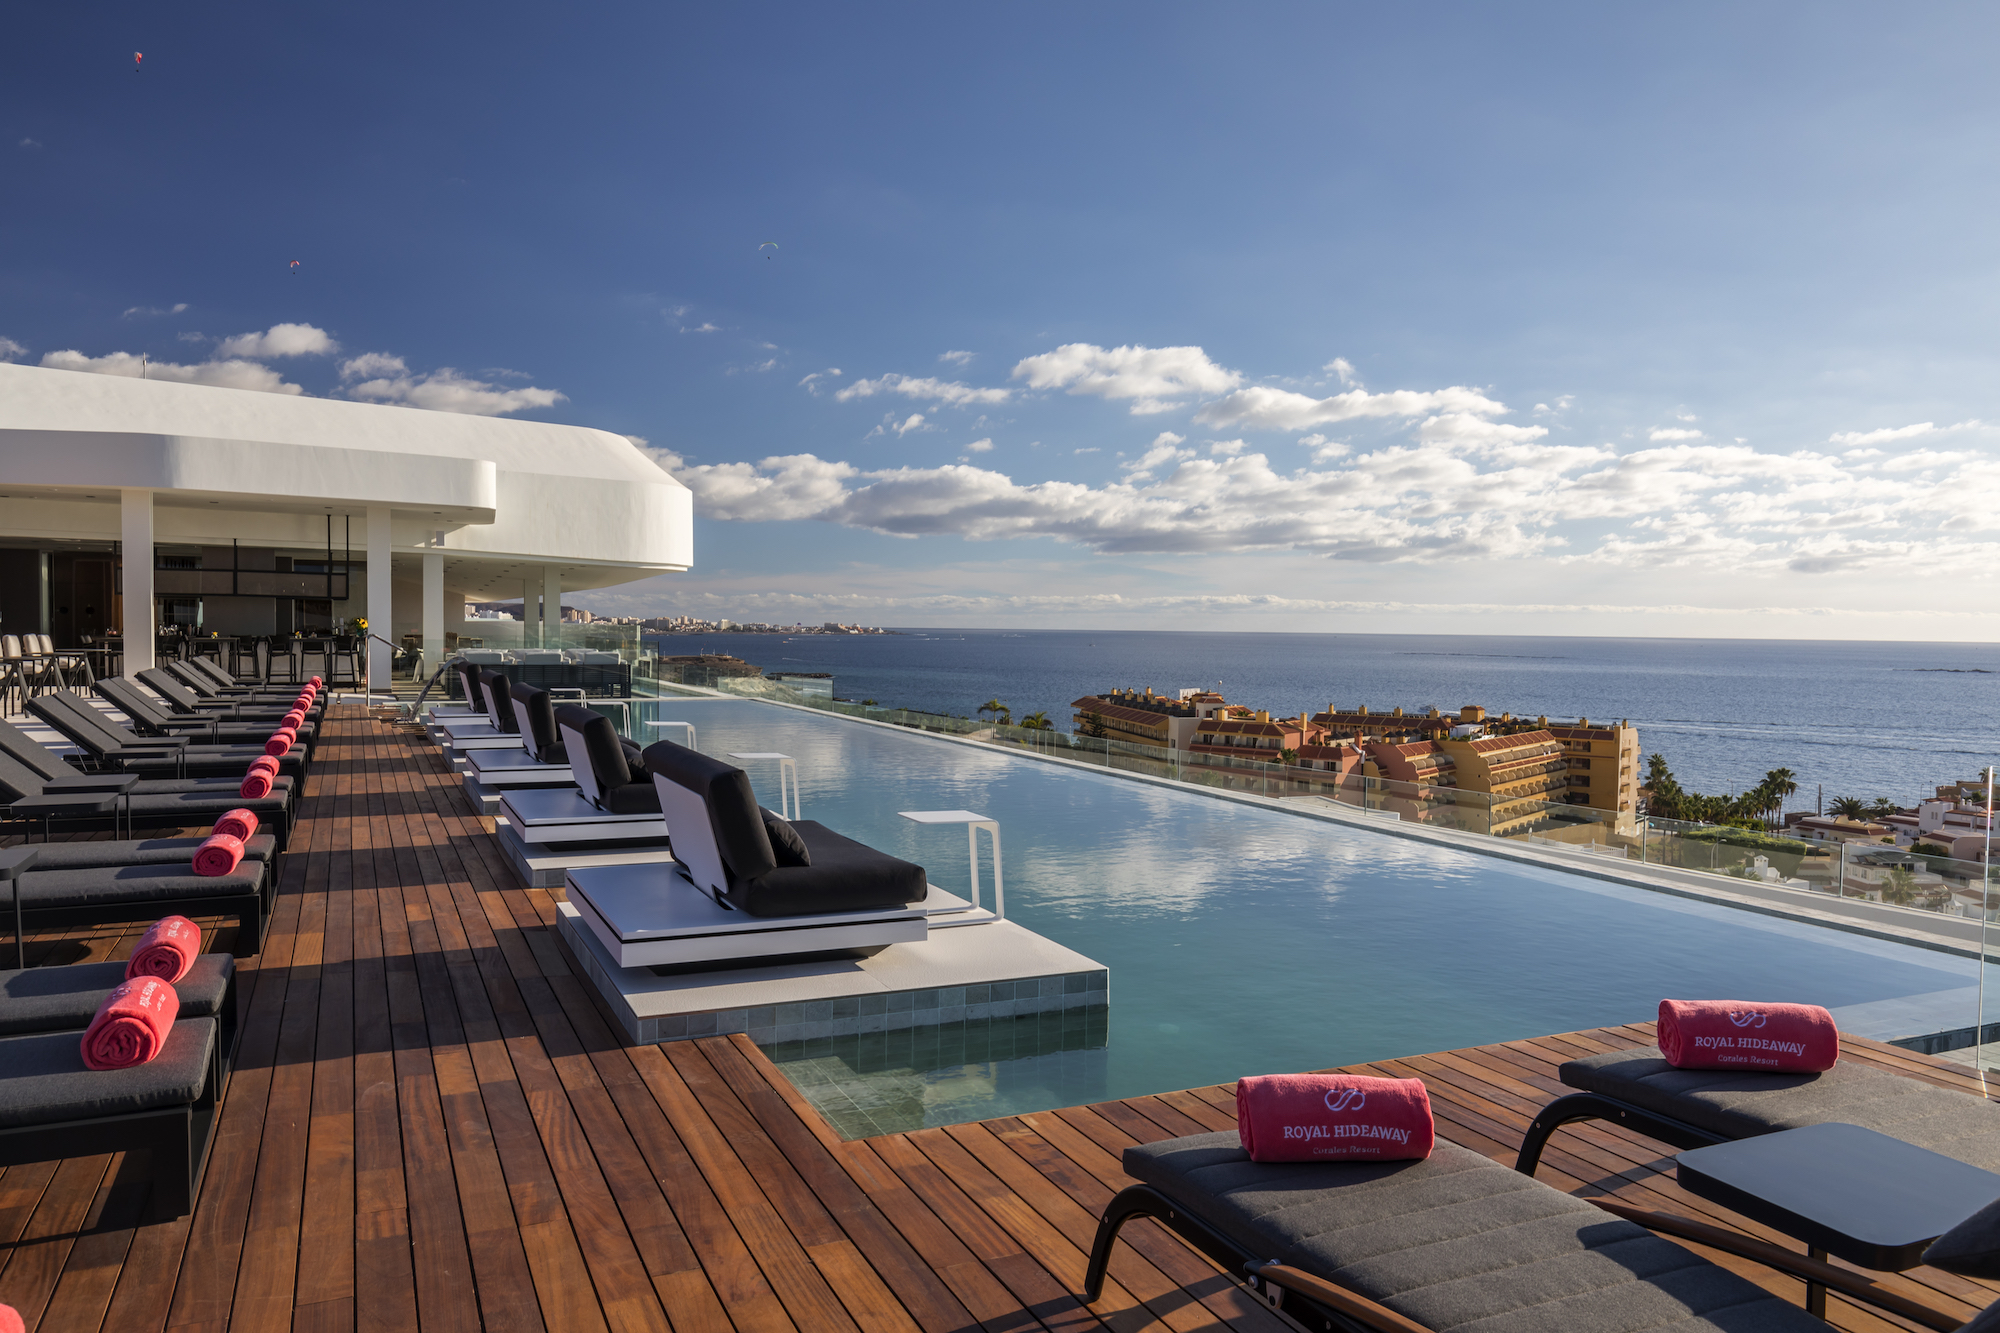 Royal Hideaway Corales Beach: A Chic, Adult-Only Hotel In Tenerife